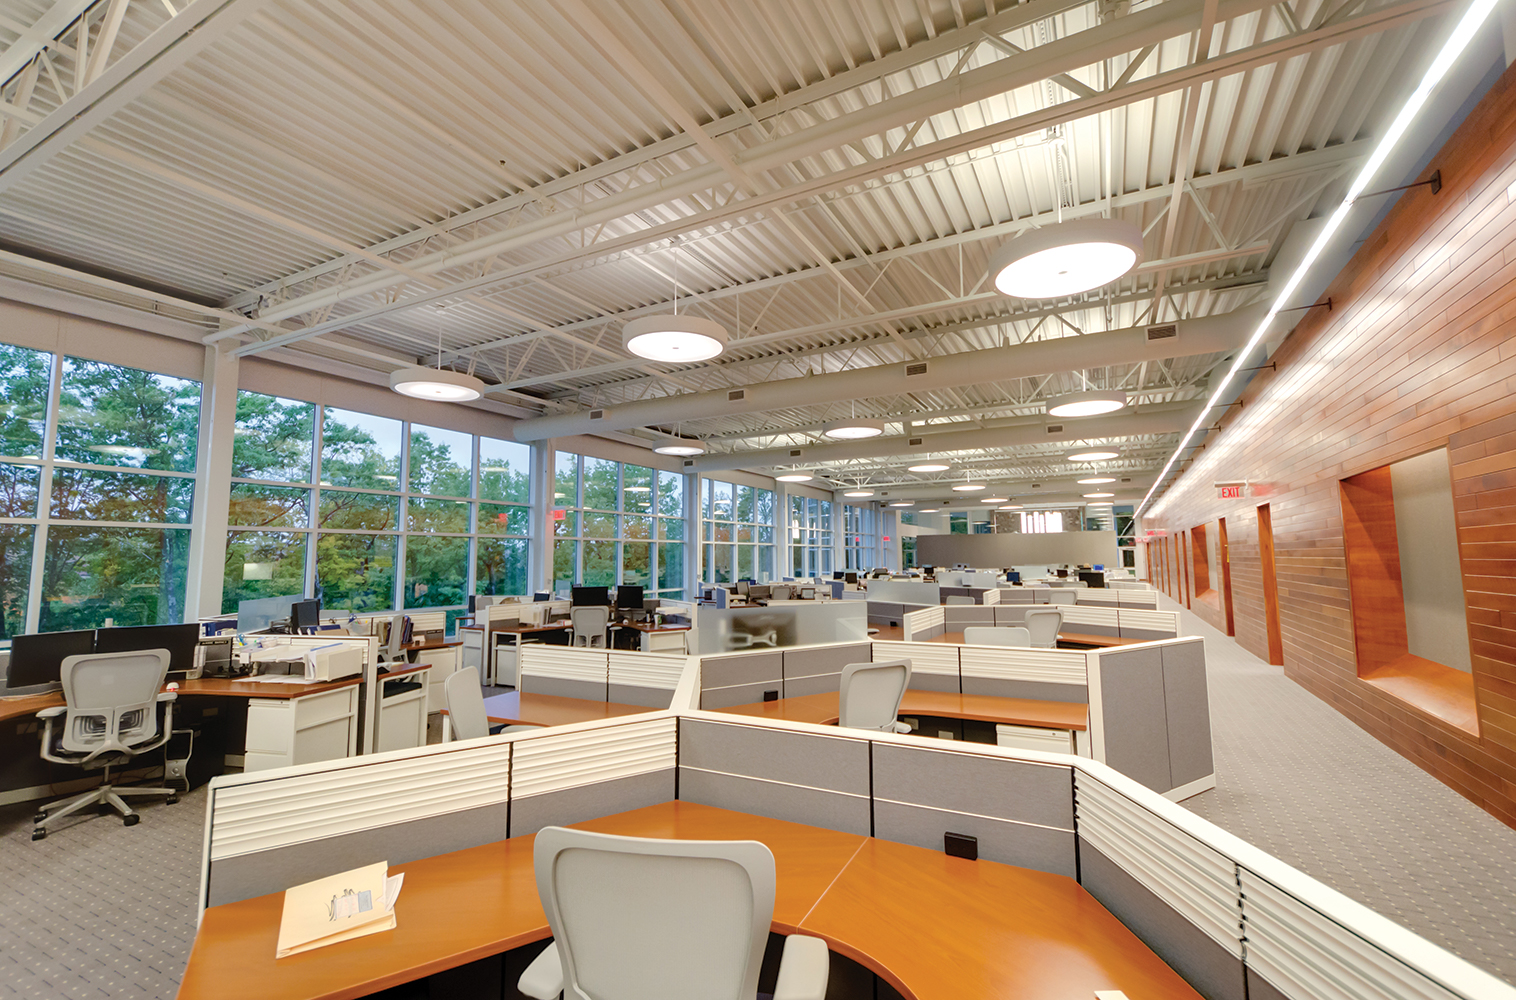 Advantus linear indirect wall mounted fixtures and Omnience pendants in a large office lighting application.